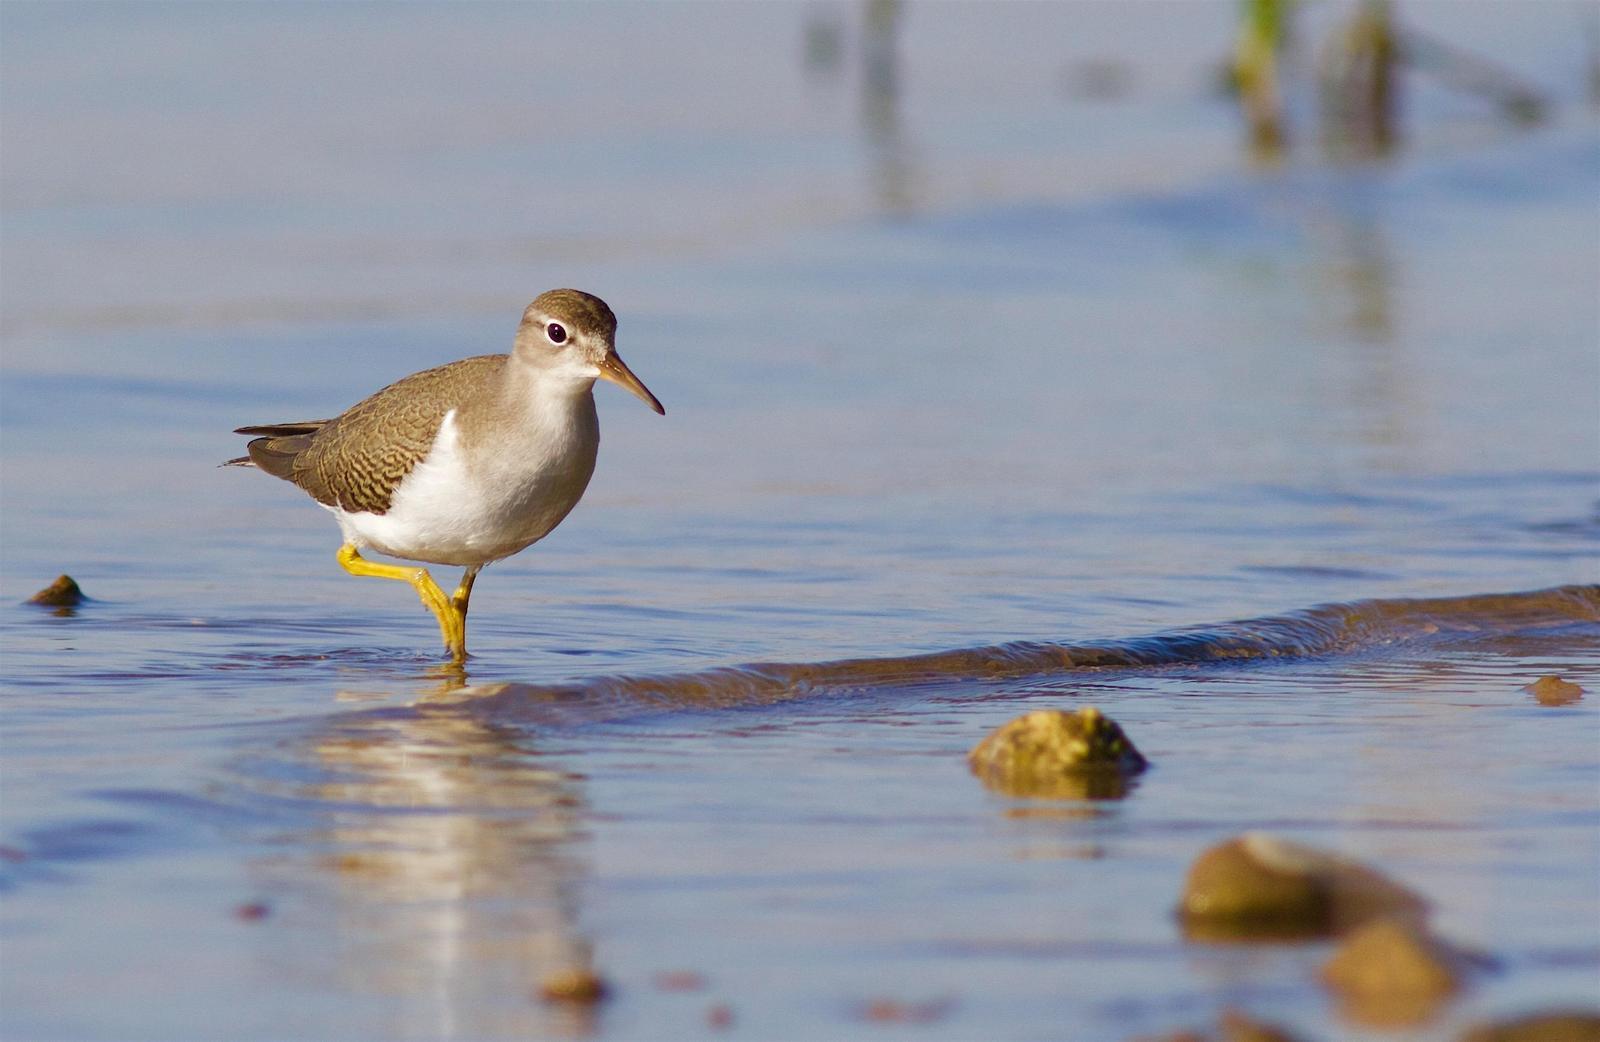 Spotted Sandpiper Photo by Kathryn Keith